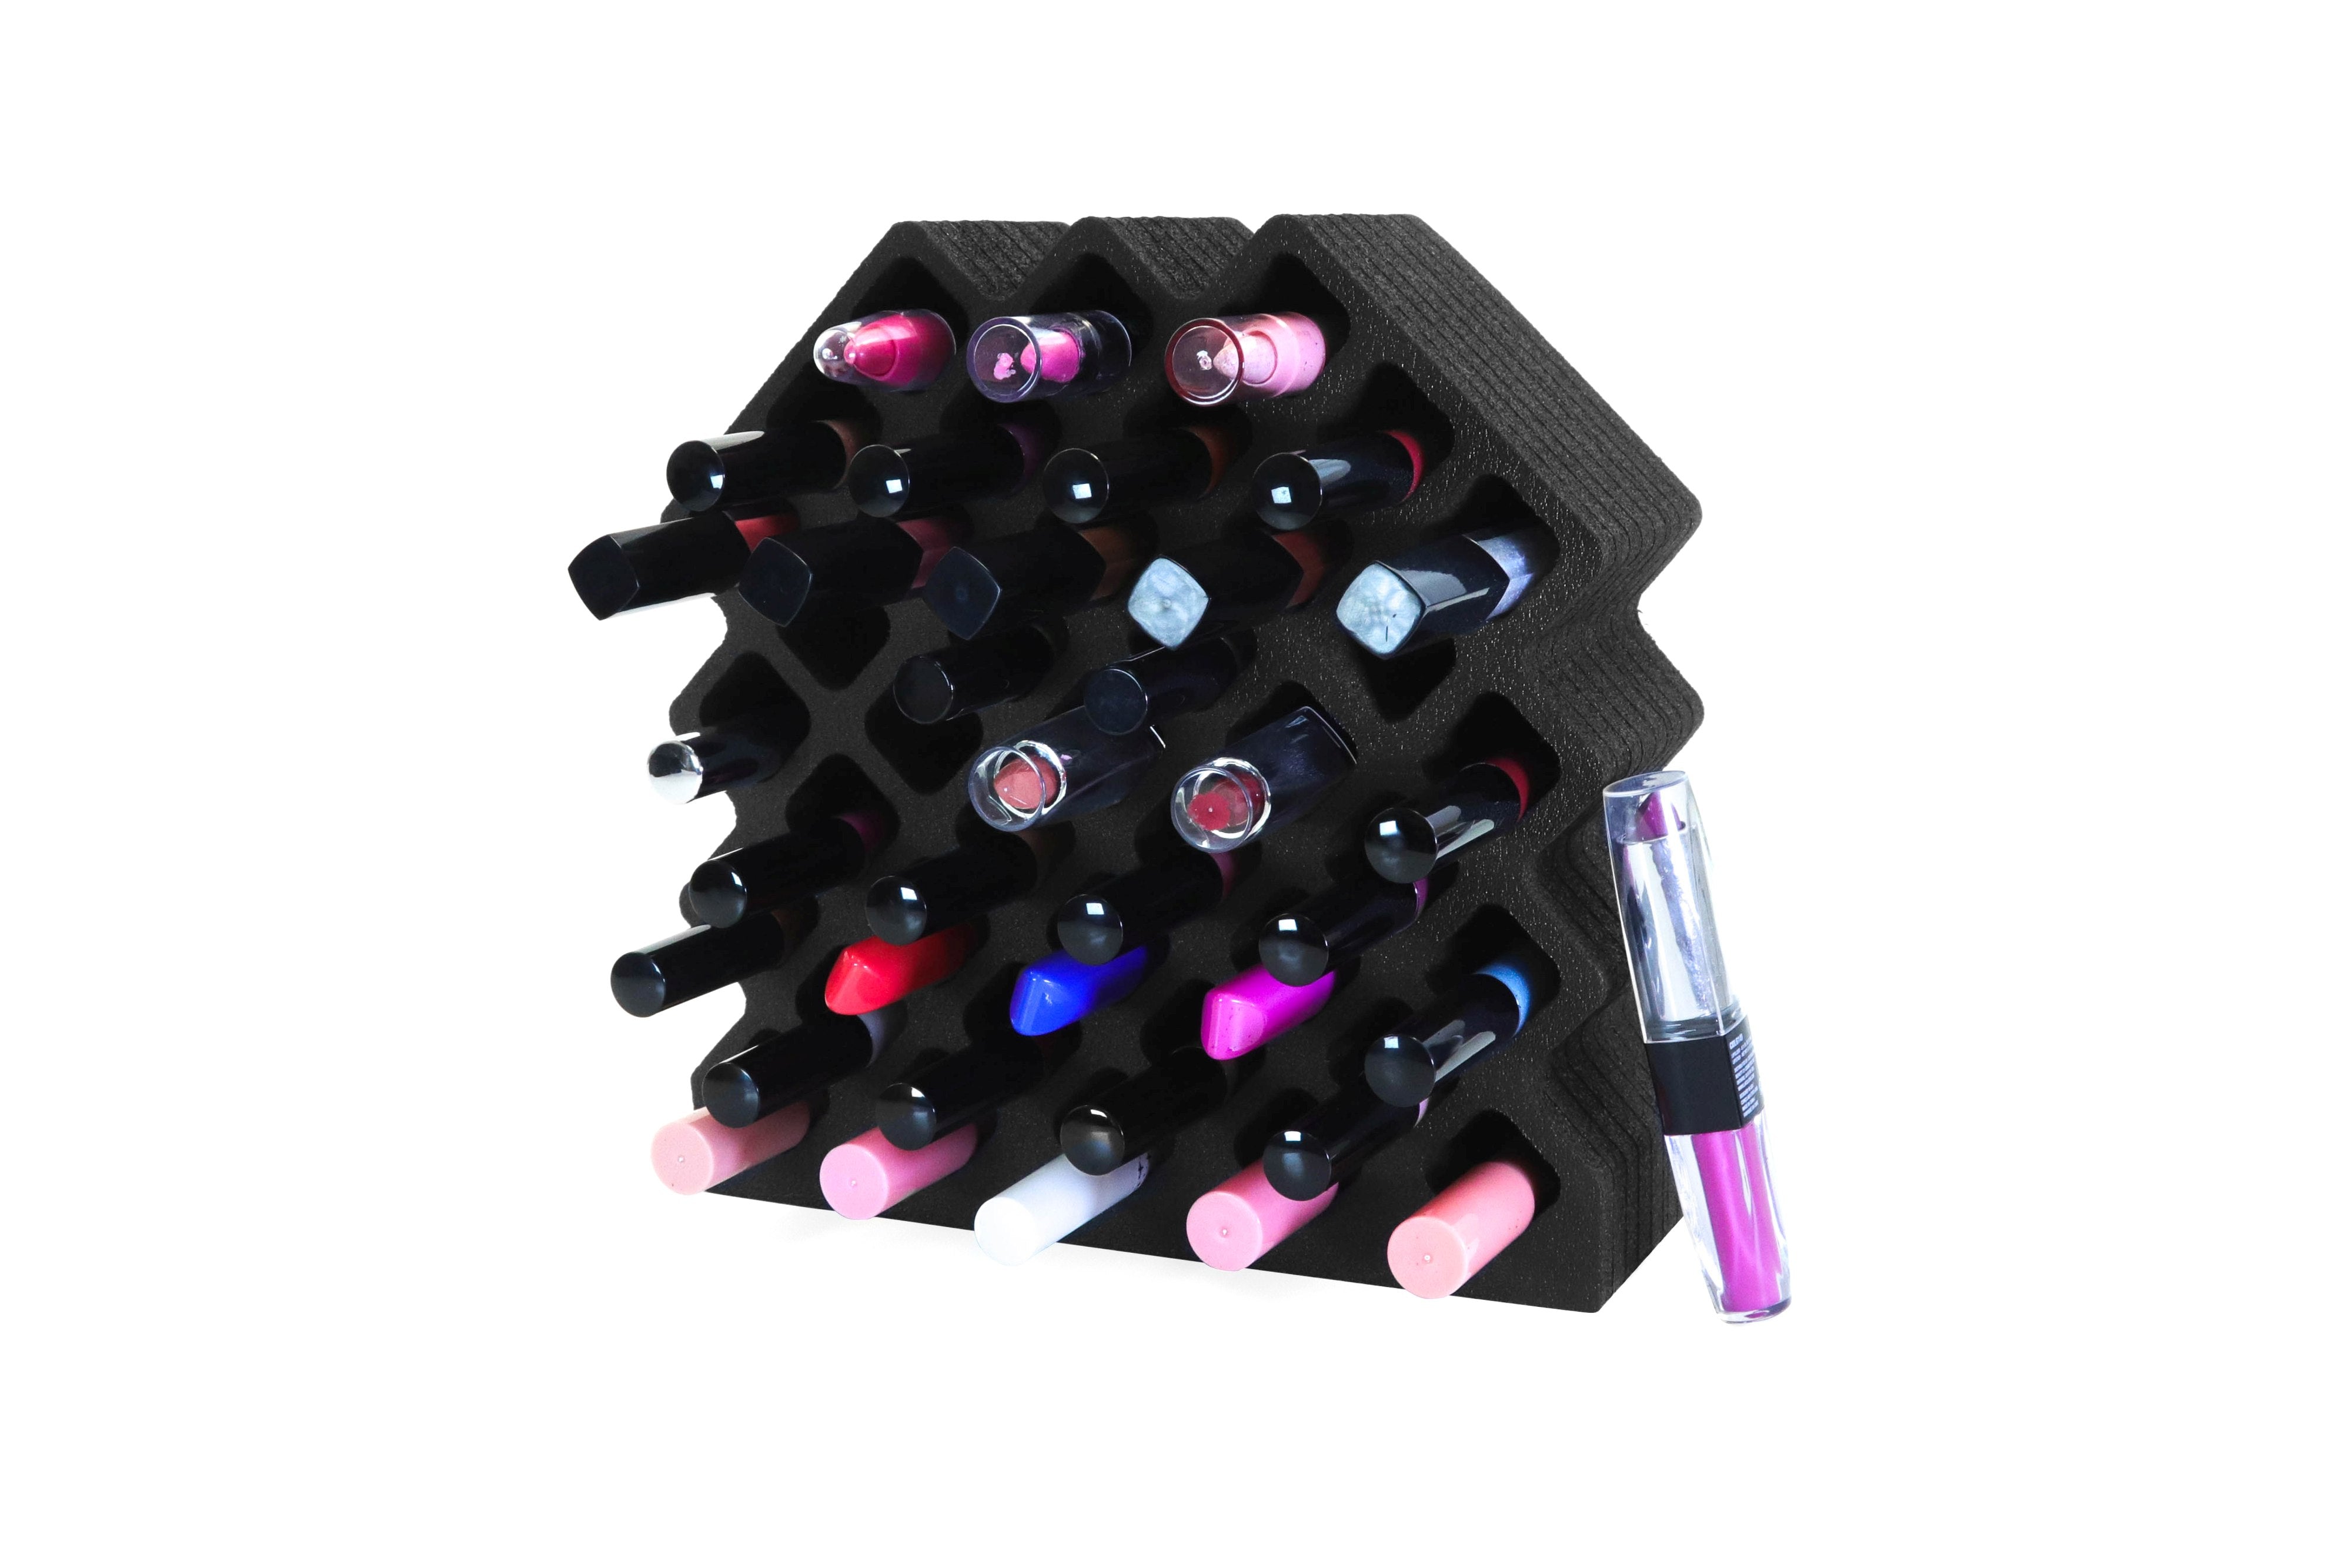 Makeup Lip Gloss Tower Stand Organizer Tray Holder for Lipgloss Tall Lipstick and More Home Bathroom Bedroom Salon 9.1 x 9 Inches Black 39 Pockets